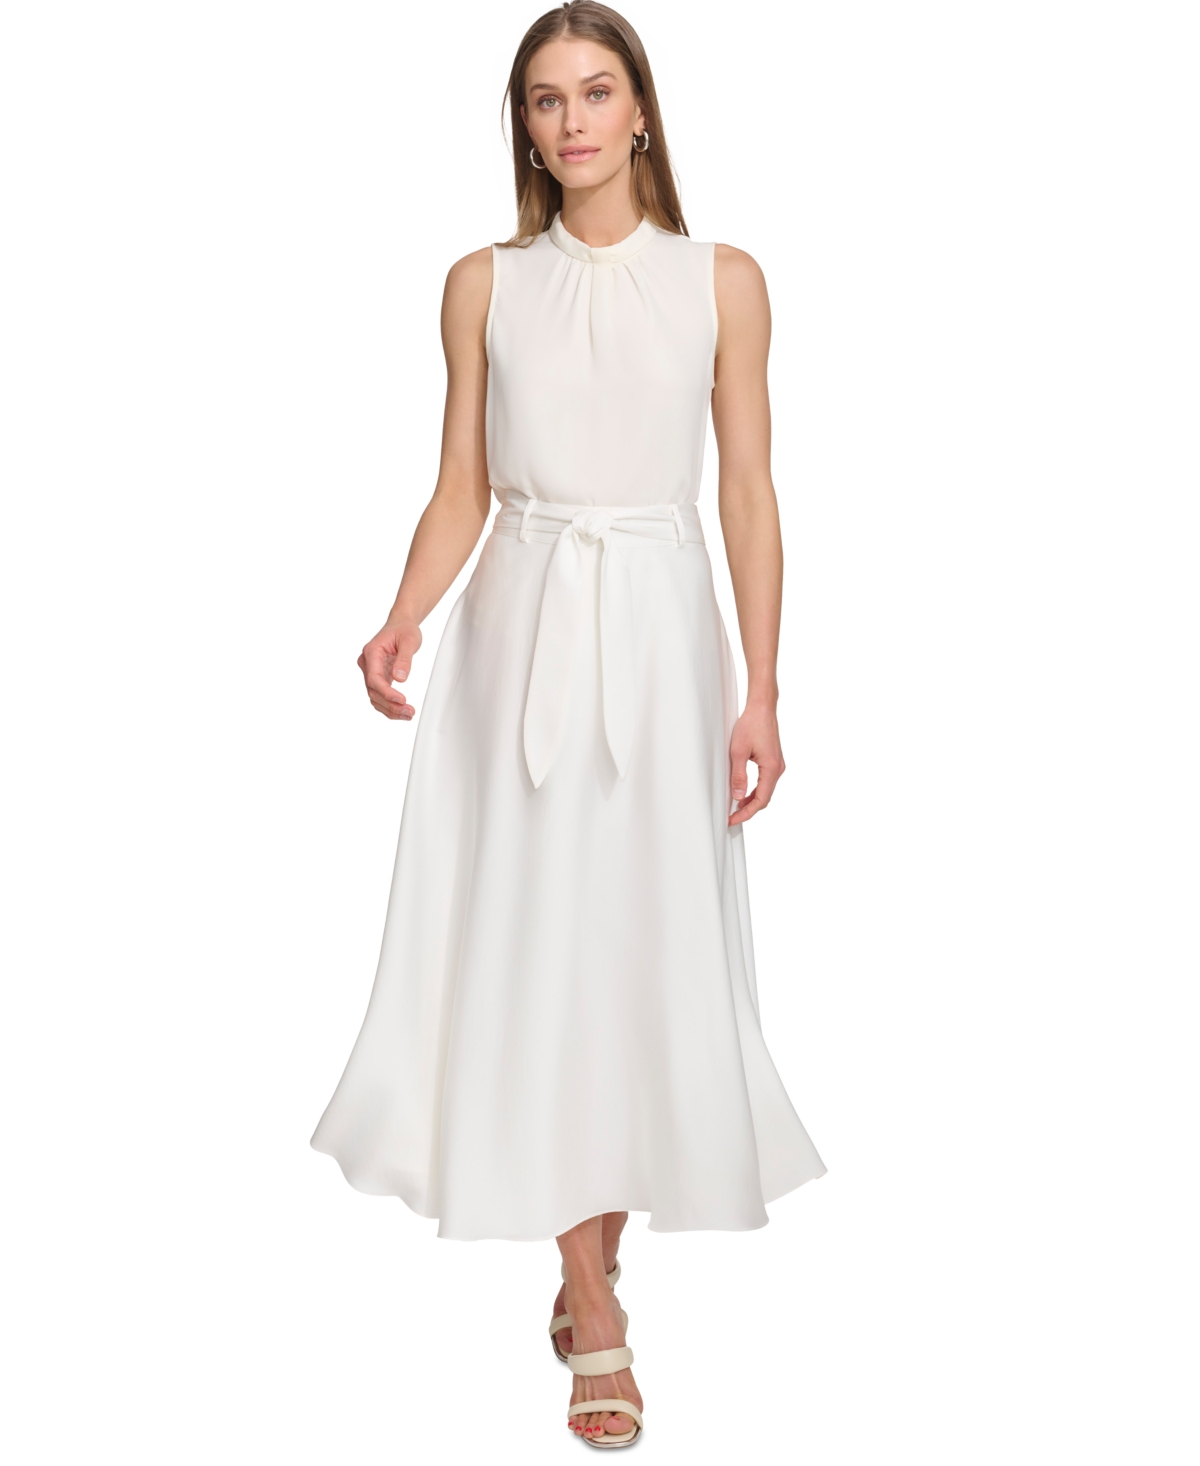 Shop Dkny Women's Belted A-line Midi Skirt In Ivory